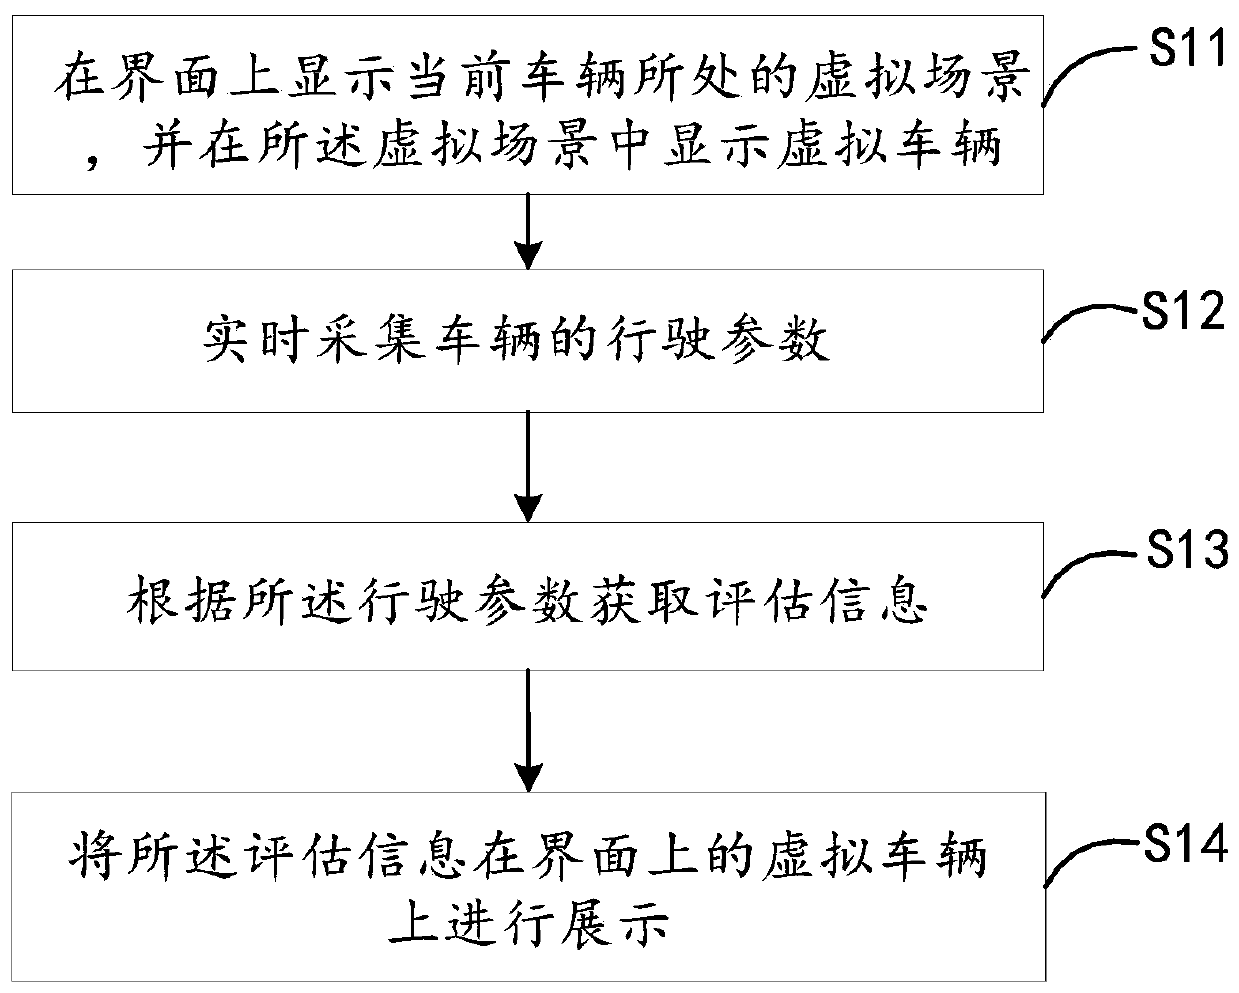 Driving behavior evaluation information display method, device and system